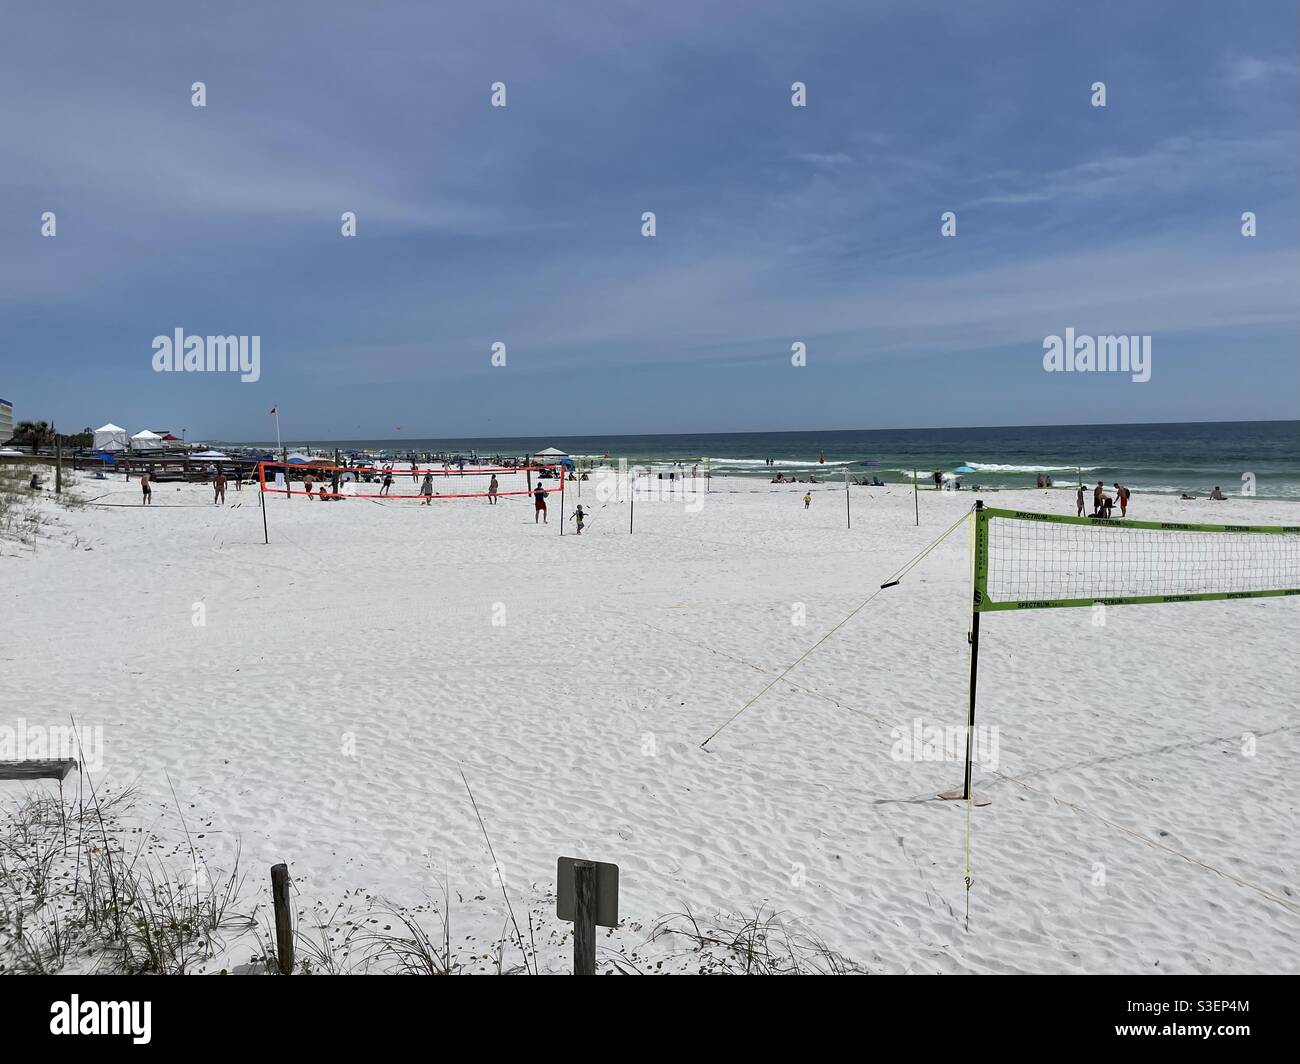 People playing volleyball on Florida white sand beach Stock Photo